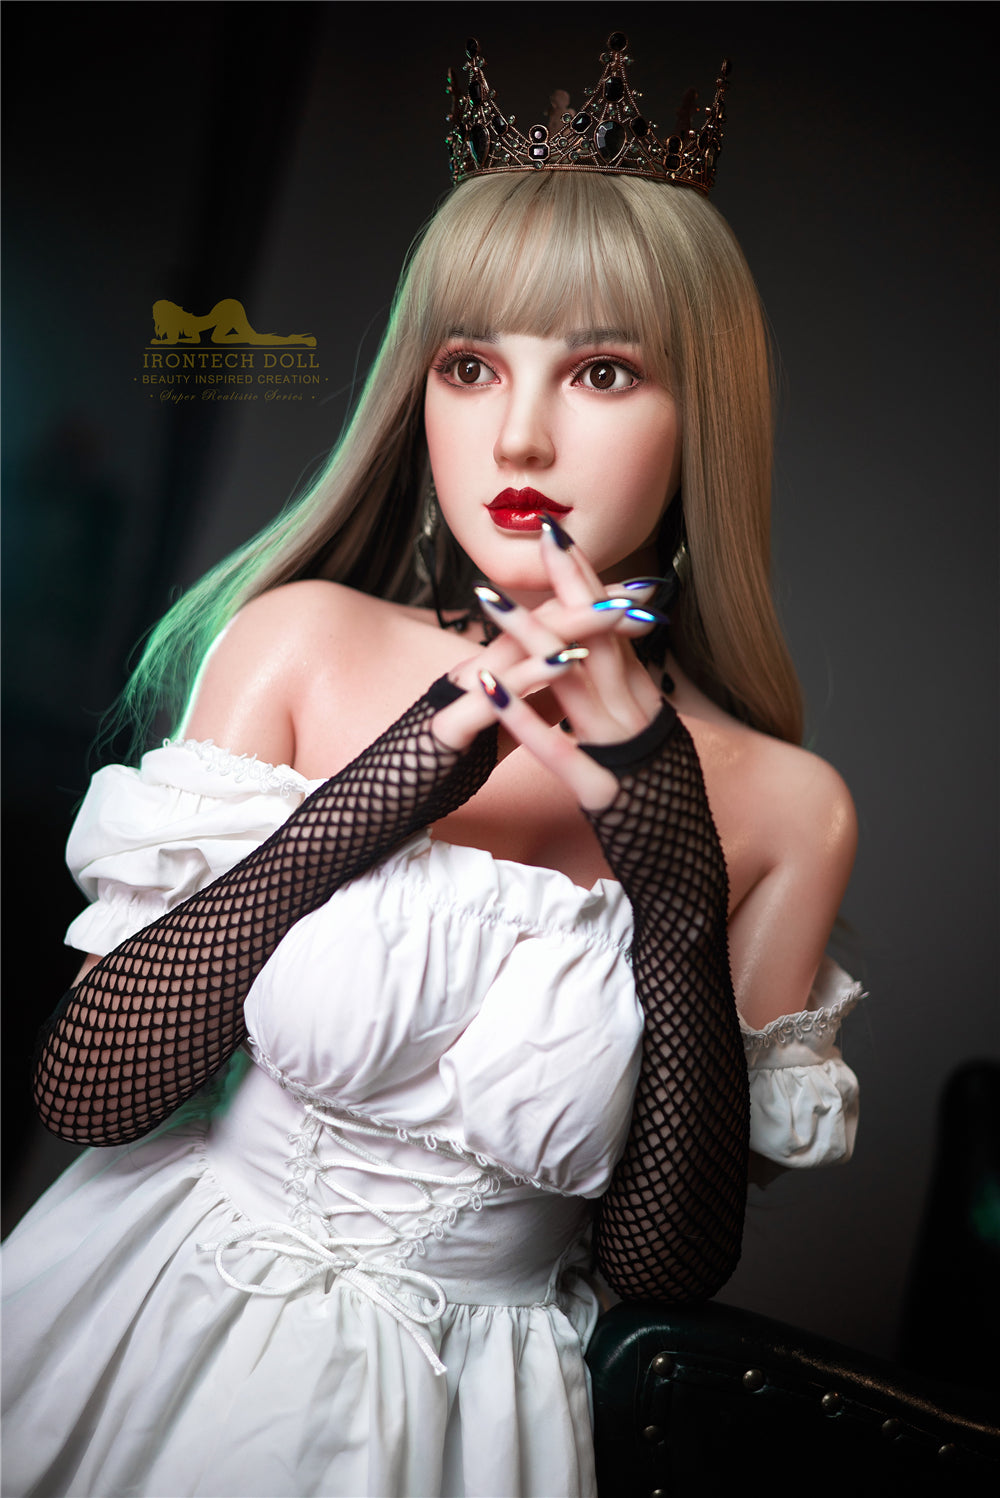 Irontech Doll 153 cm Silicone - Mallory | Sex Dolls SG